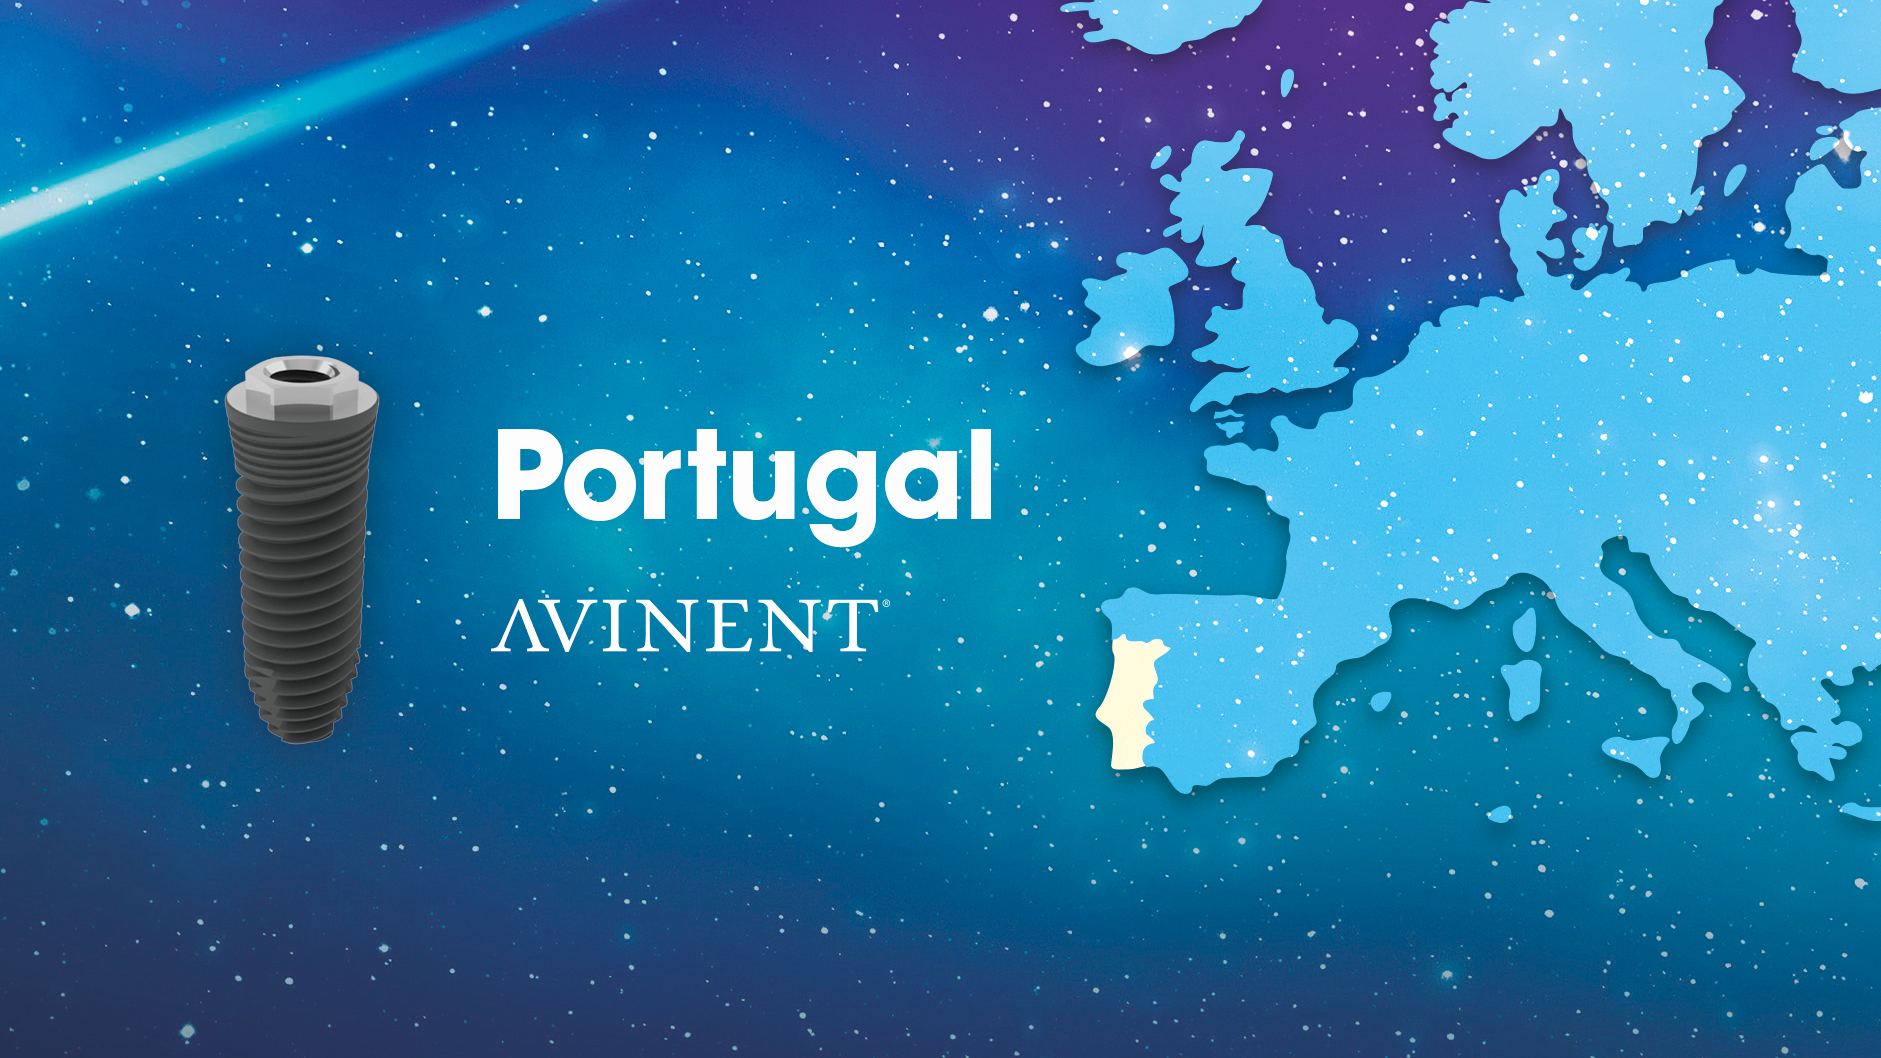 Portugal: a success story of the expansion of the AVINENT Implant System